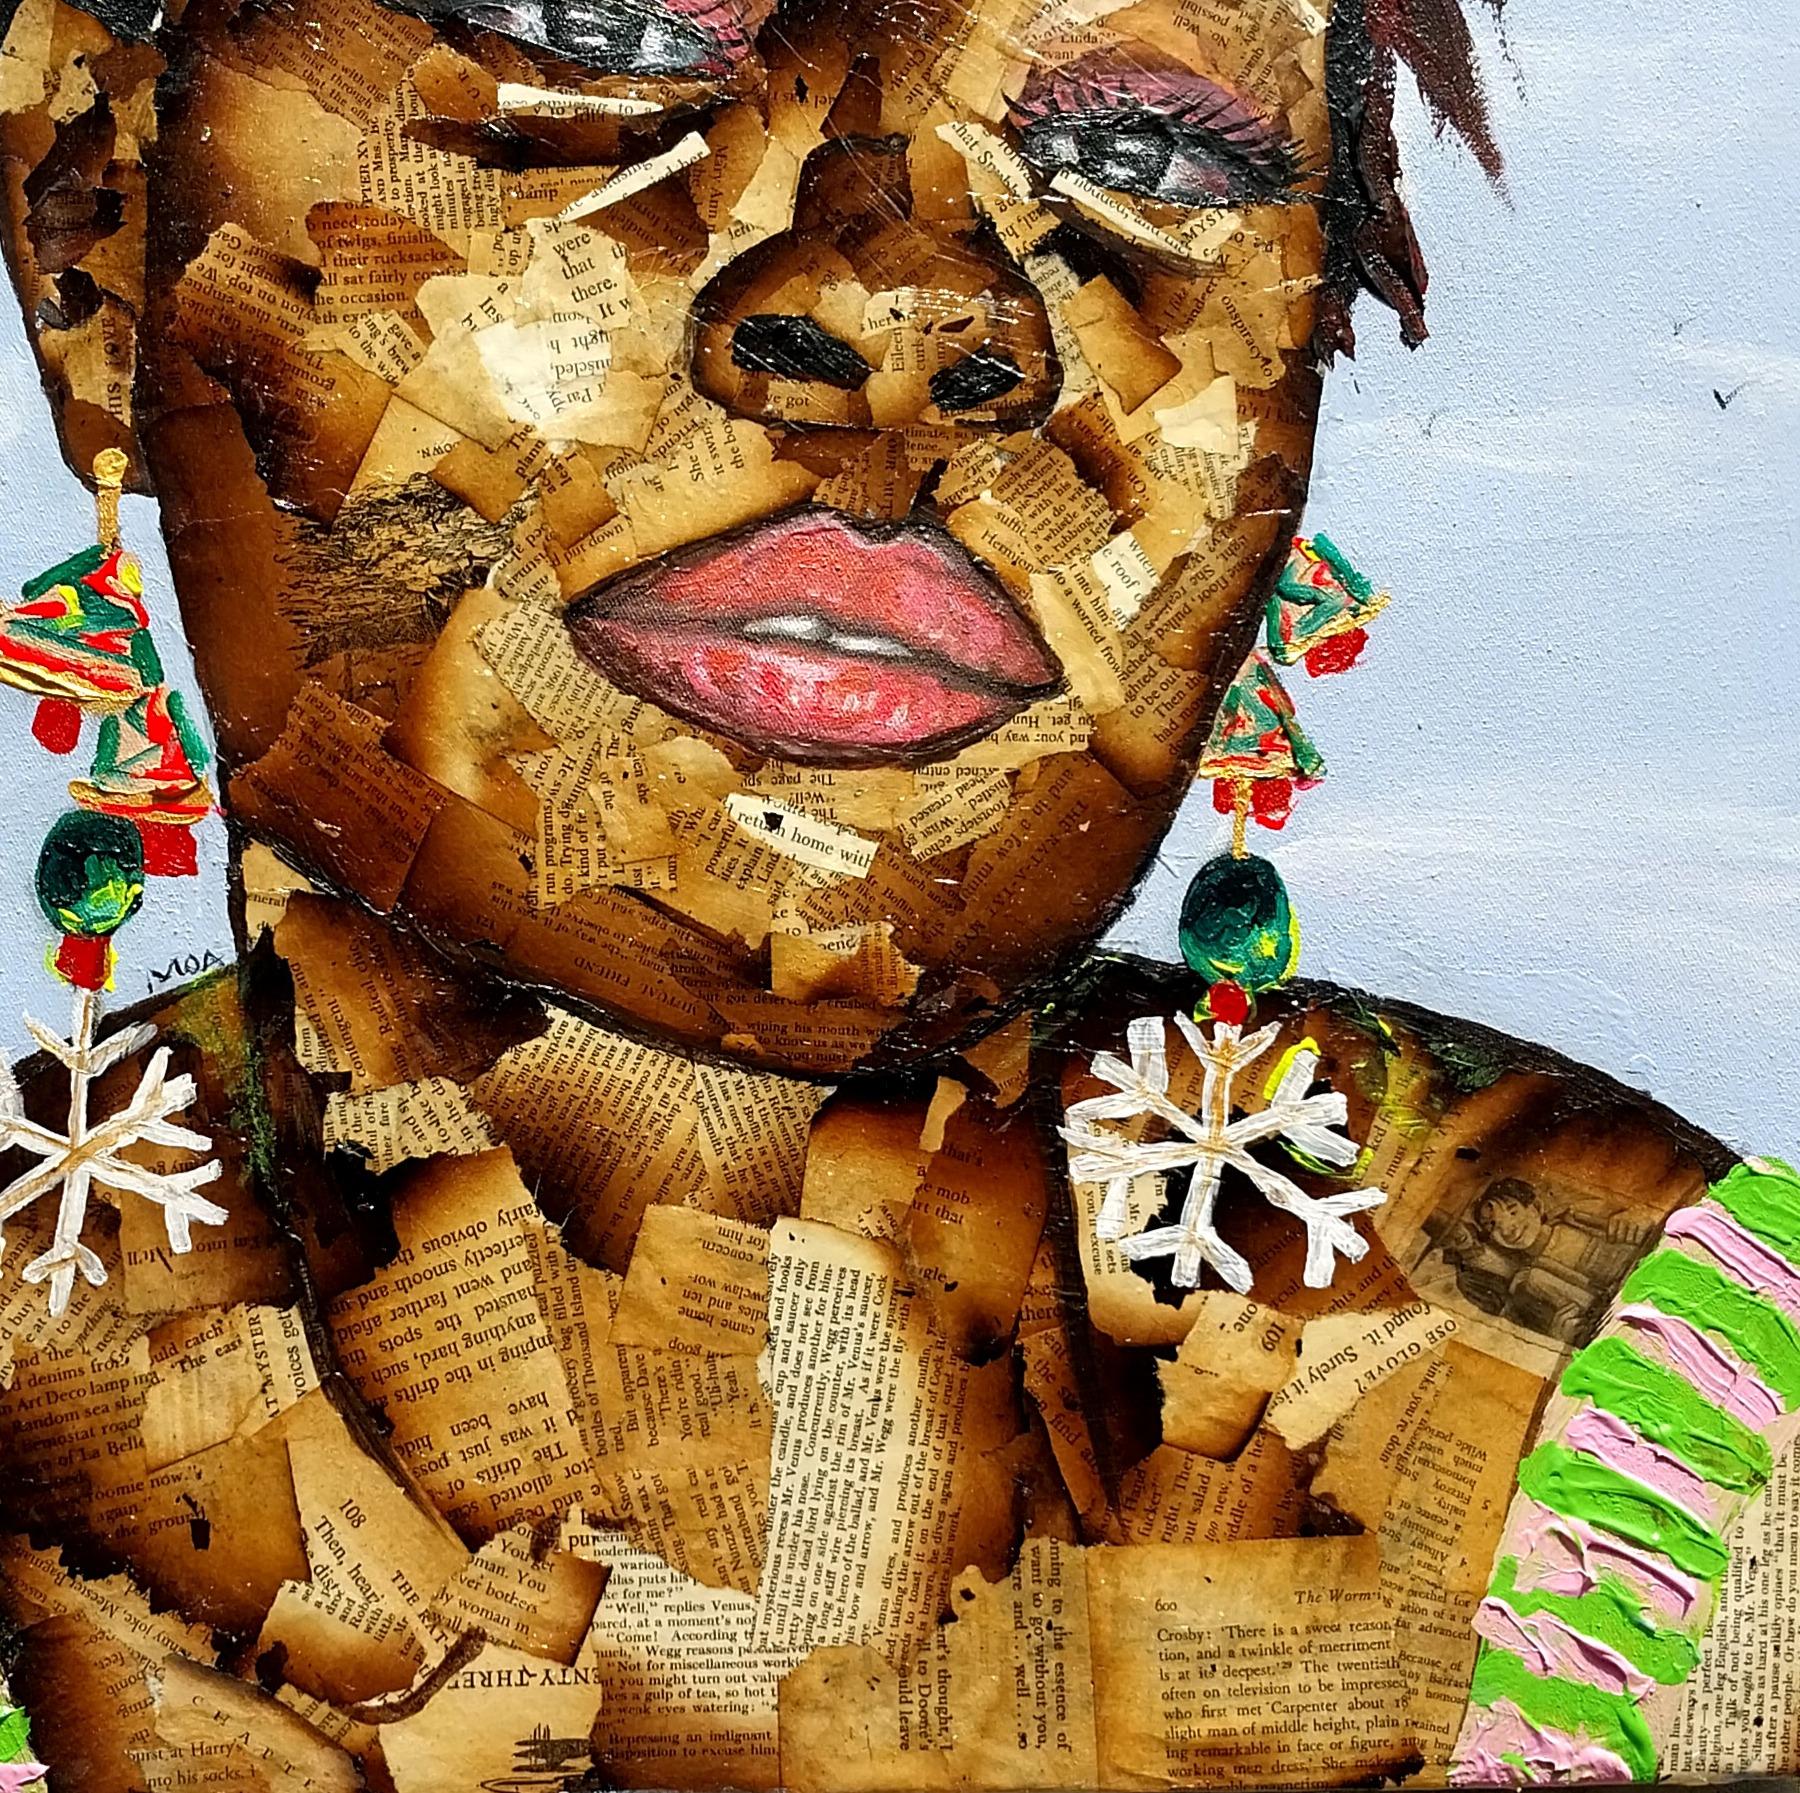 Brave Beauty is an Original Painting by Mariam Olubunmi. Mariam created the painting with Burnt Newspaper and Acrylic on primed 24W by 36H canvas. Brave Beauty is a series of works that documents the struggles of women and how strong they stay with